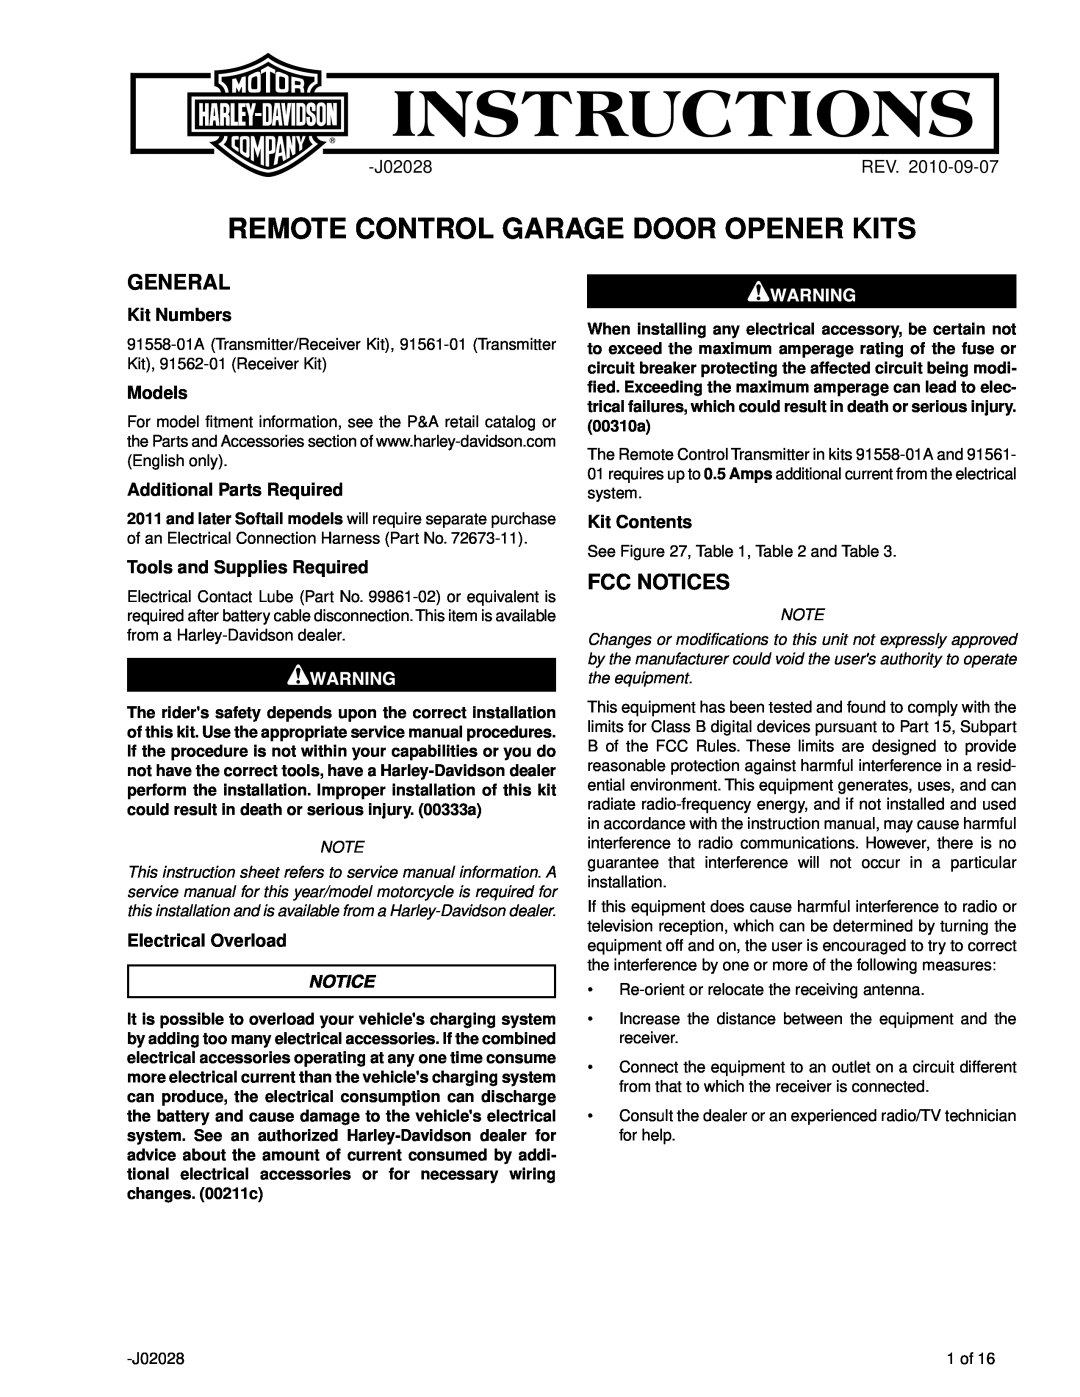 SkyLink 91558-01A service manual General, Fcc Notices, J02028, Rev, Kit Numbers, Models, Additional Parts Required 